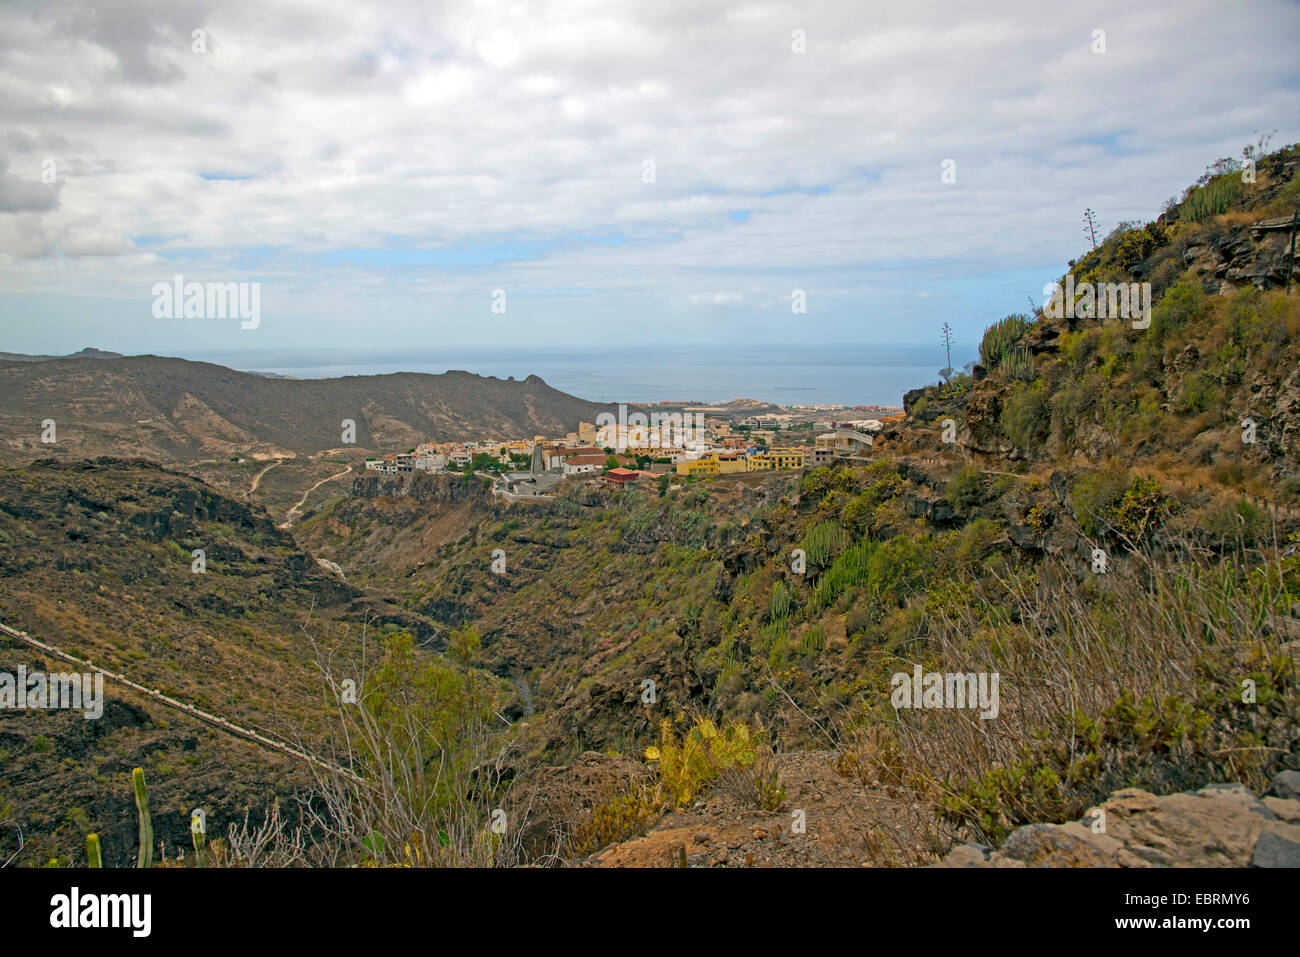 Barranco del Infierno, village of Adeje in the background, Canary Islands, Tenerife Stock Photo